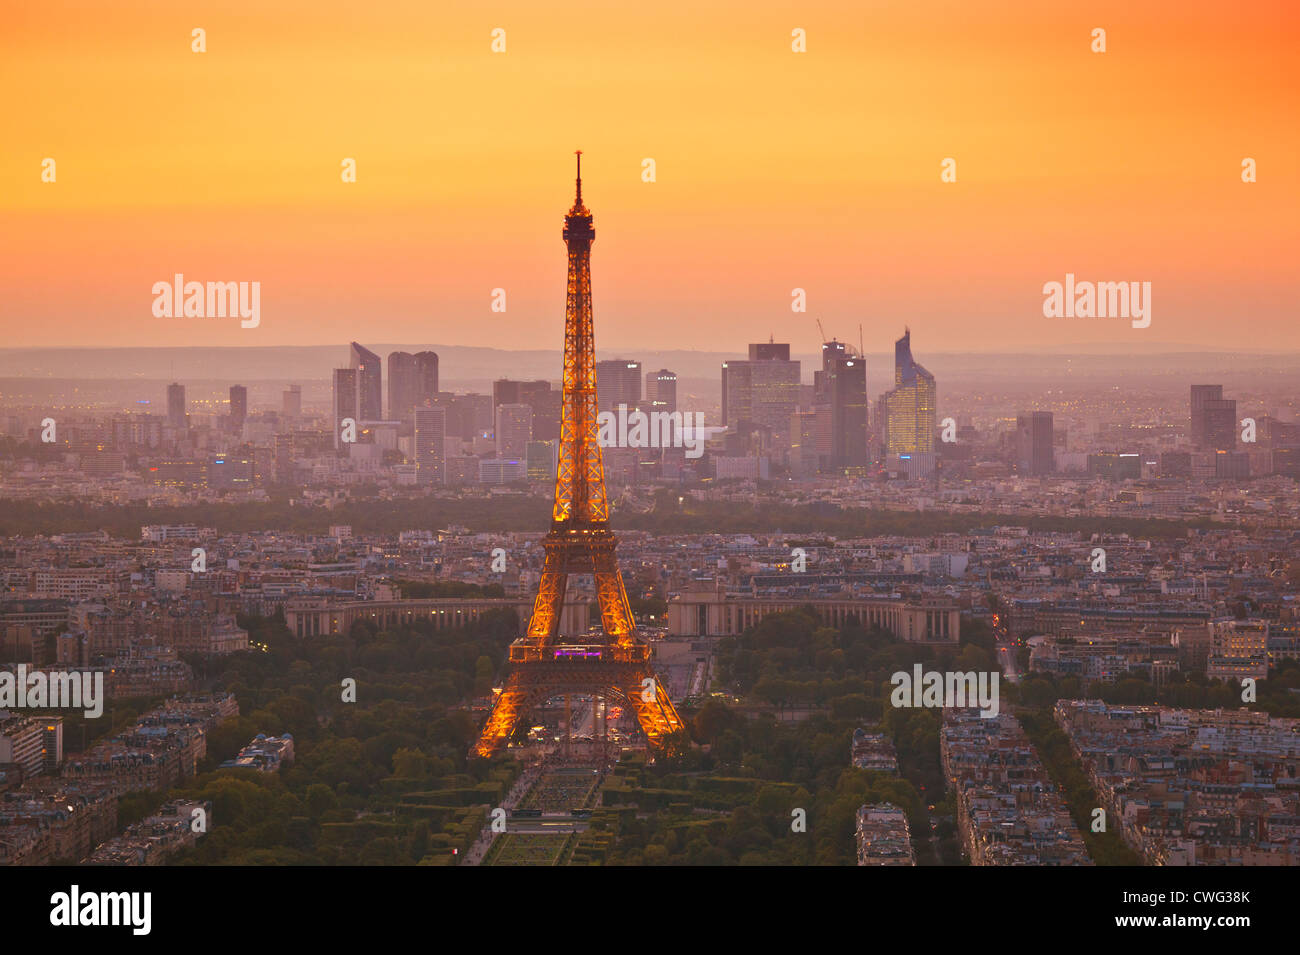 Paris skyline at sunset showing the Eiffel tower and surrounding areas Paris France EU Europe Stock Photo